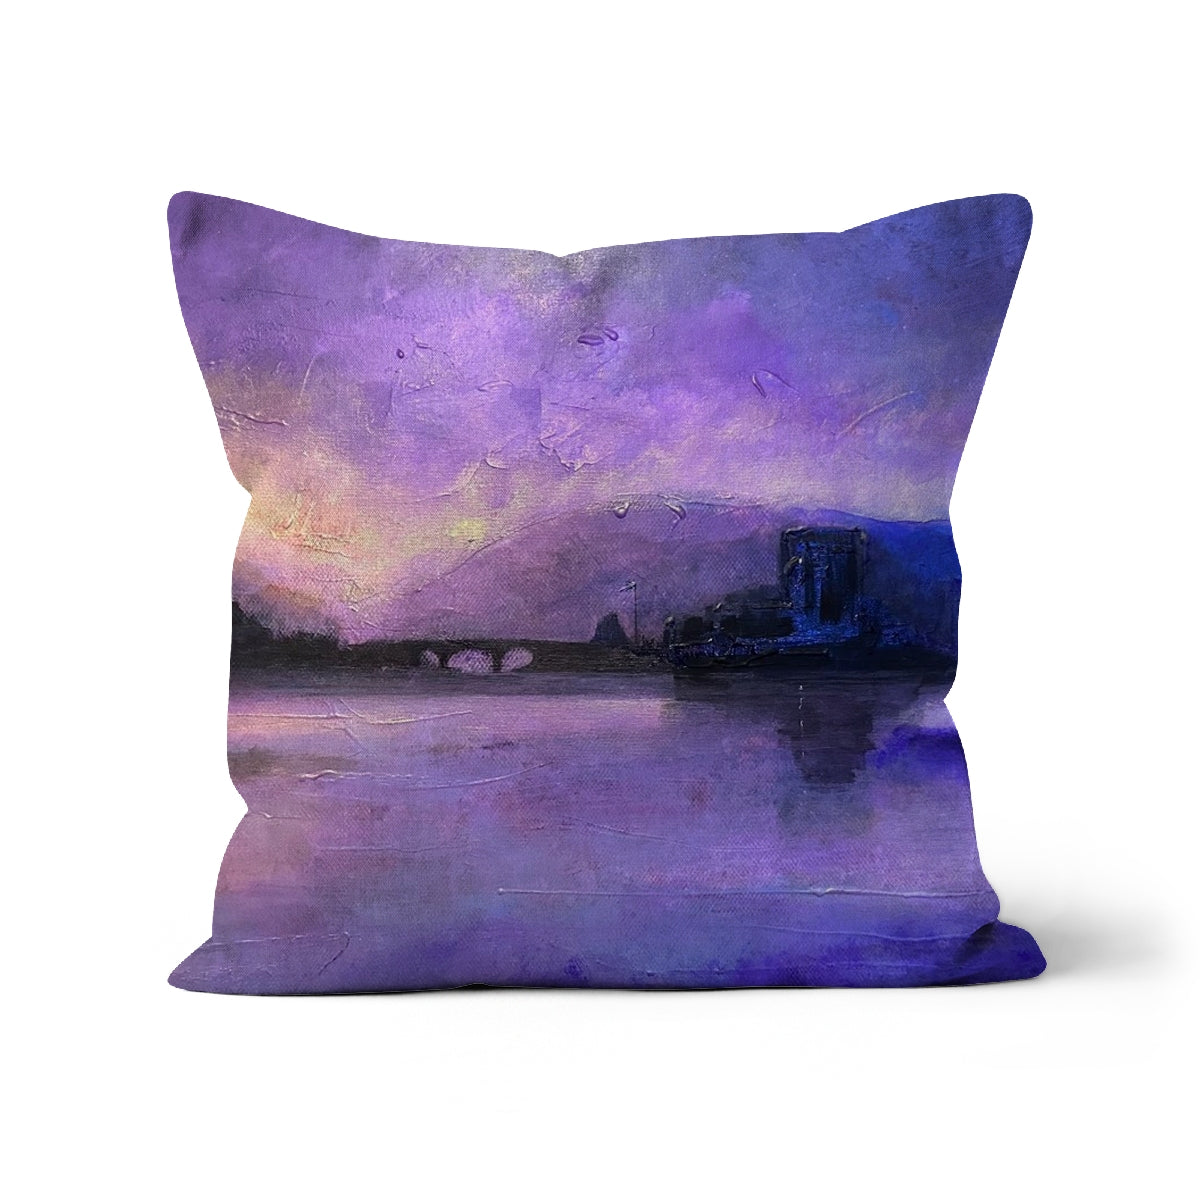 Eilean Donan Castle Moonset Art Gifts Cushion-Cushions-Historic & Iconic Scotland Art Gallery-Faux Suede-24"x24"-Paintings, Prints, Homeware, Art Gifts From Scotland By Scottish Artist Kevin Hunter